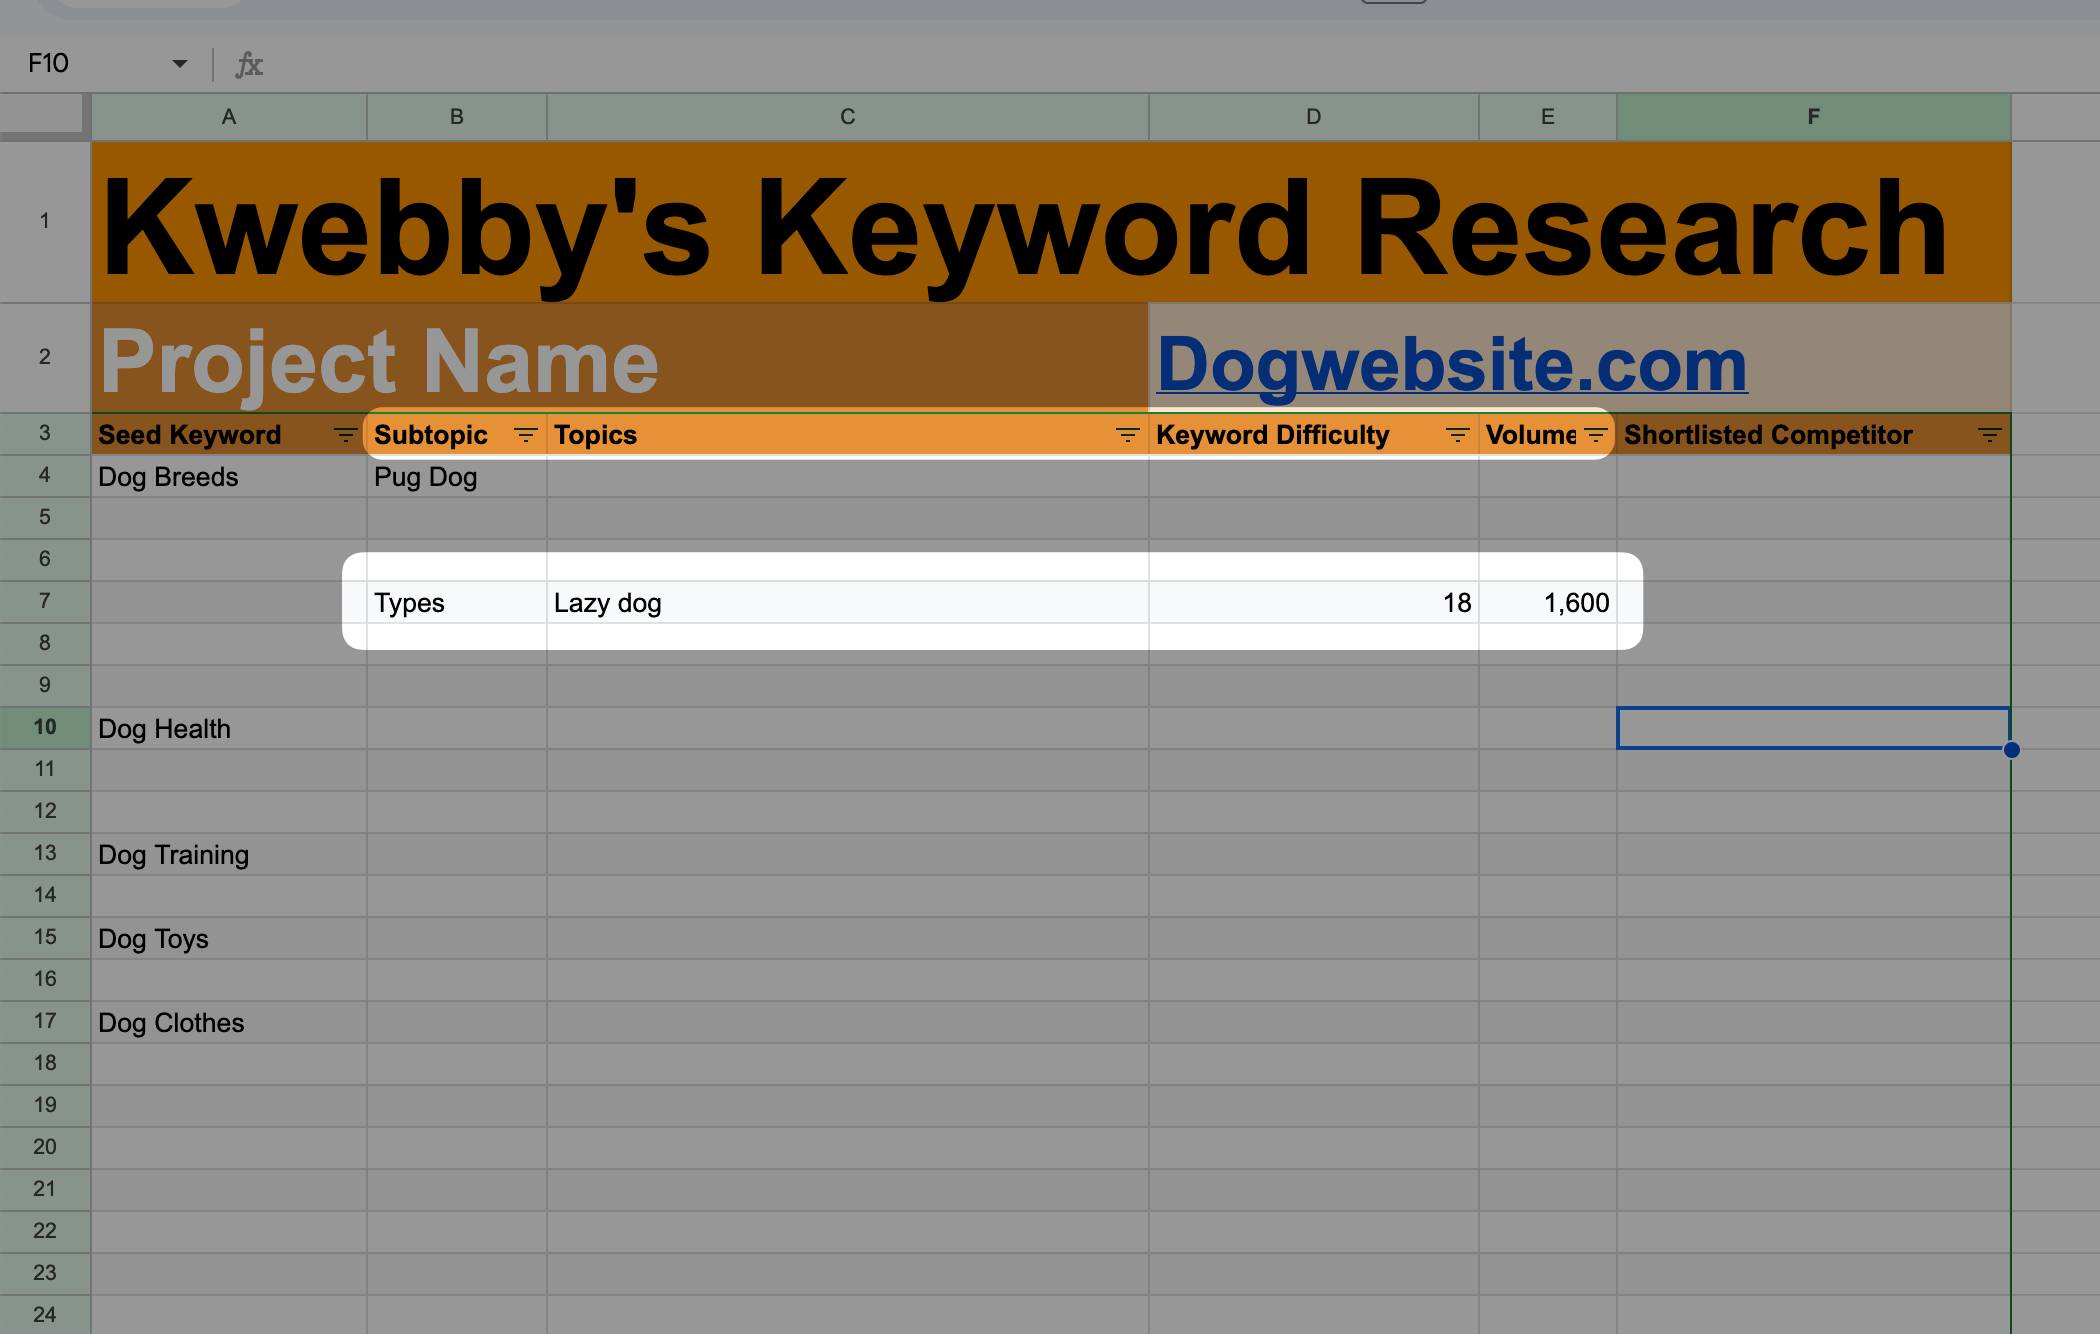 How to do Keyword Research for New Sites to Get 100k Traffic (Template Inside) 7